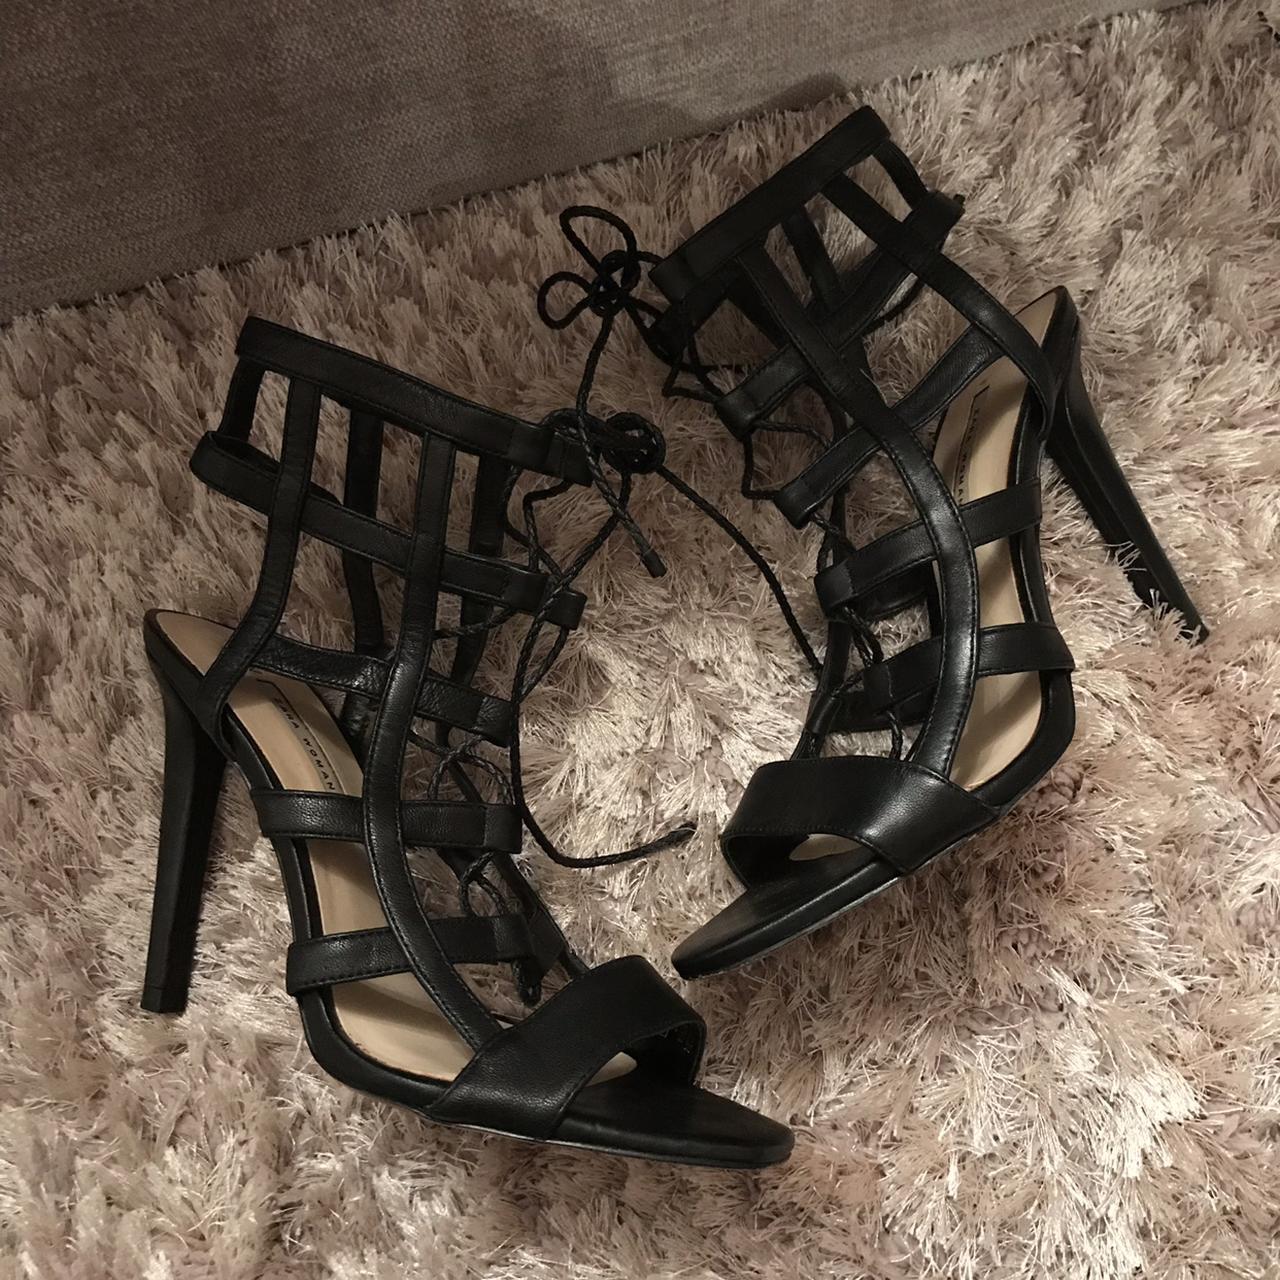 ZARA BLACK LEATHER STRAPPY LACE UP HIGH HEEL SANDALS SHOES 💕 Stunning 💕 |  eBay